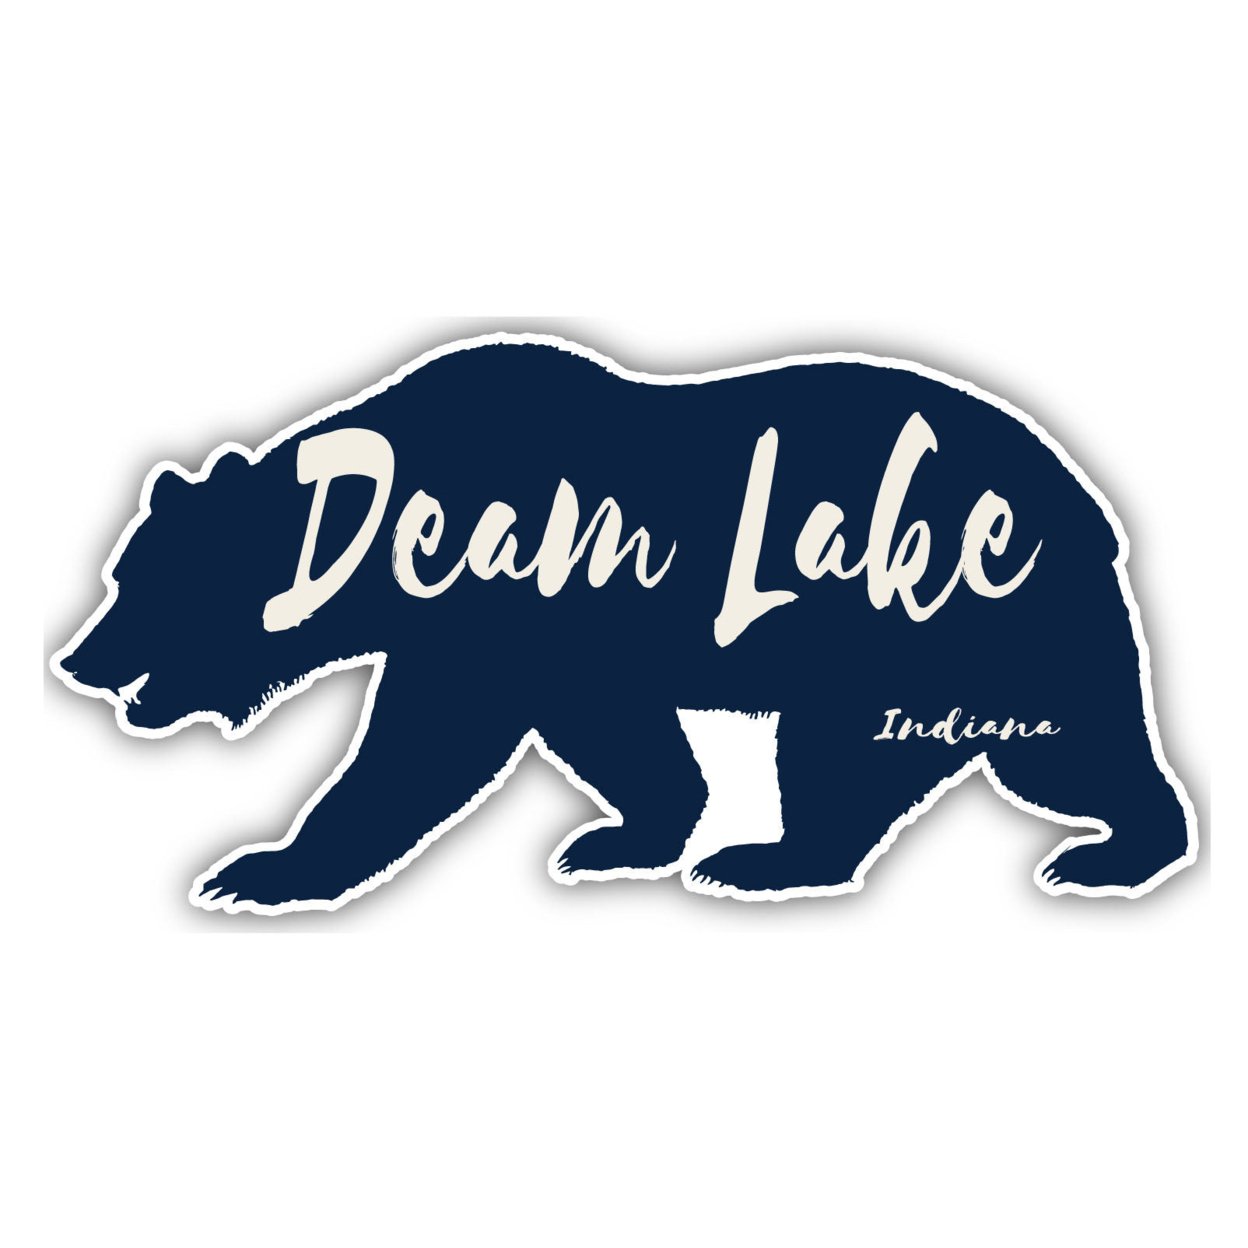 Deam Lake Indiana Souvenir Decorative Stickers (Choose Theme And Size) - Single Unit, 8-Inch, Great Outdoors